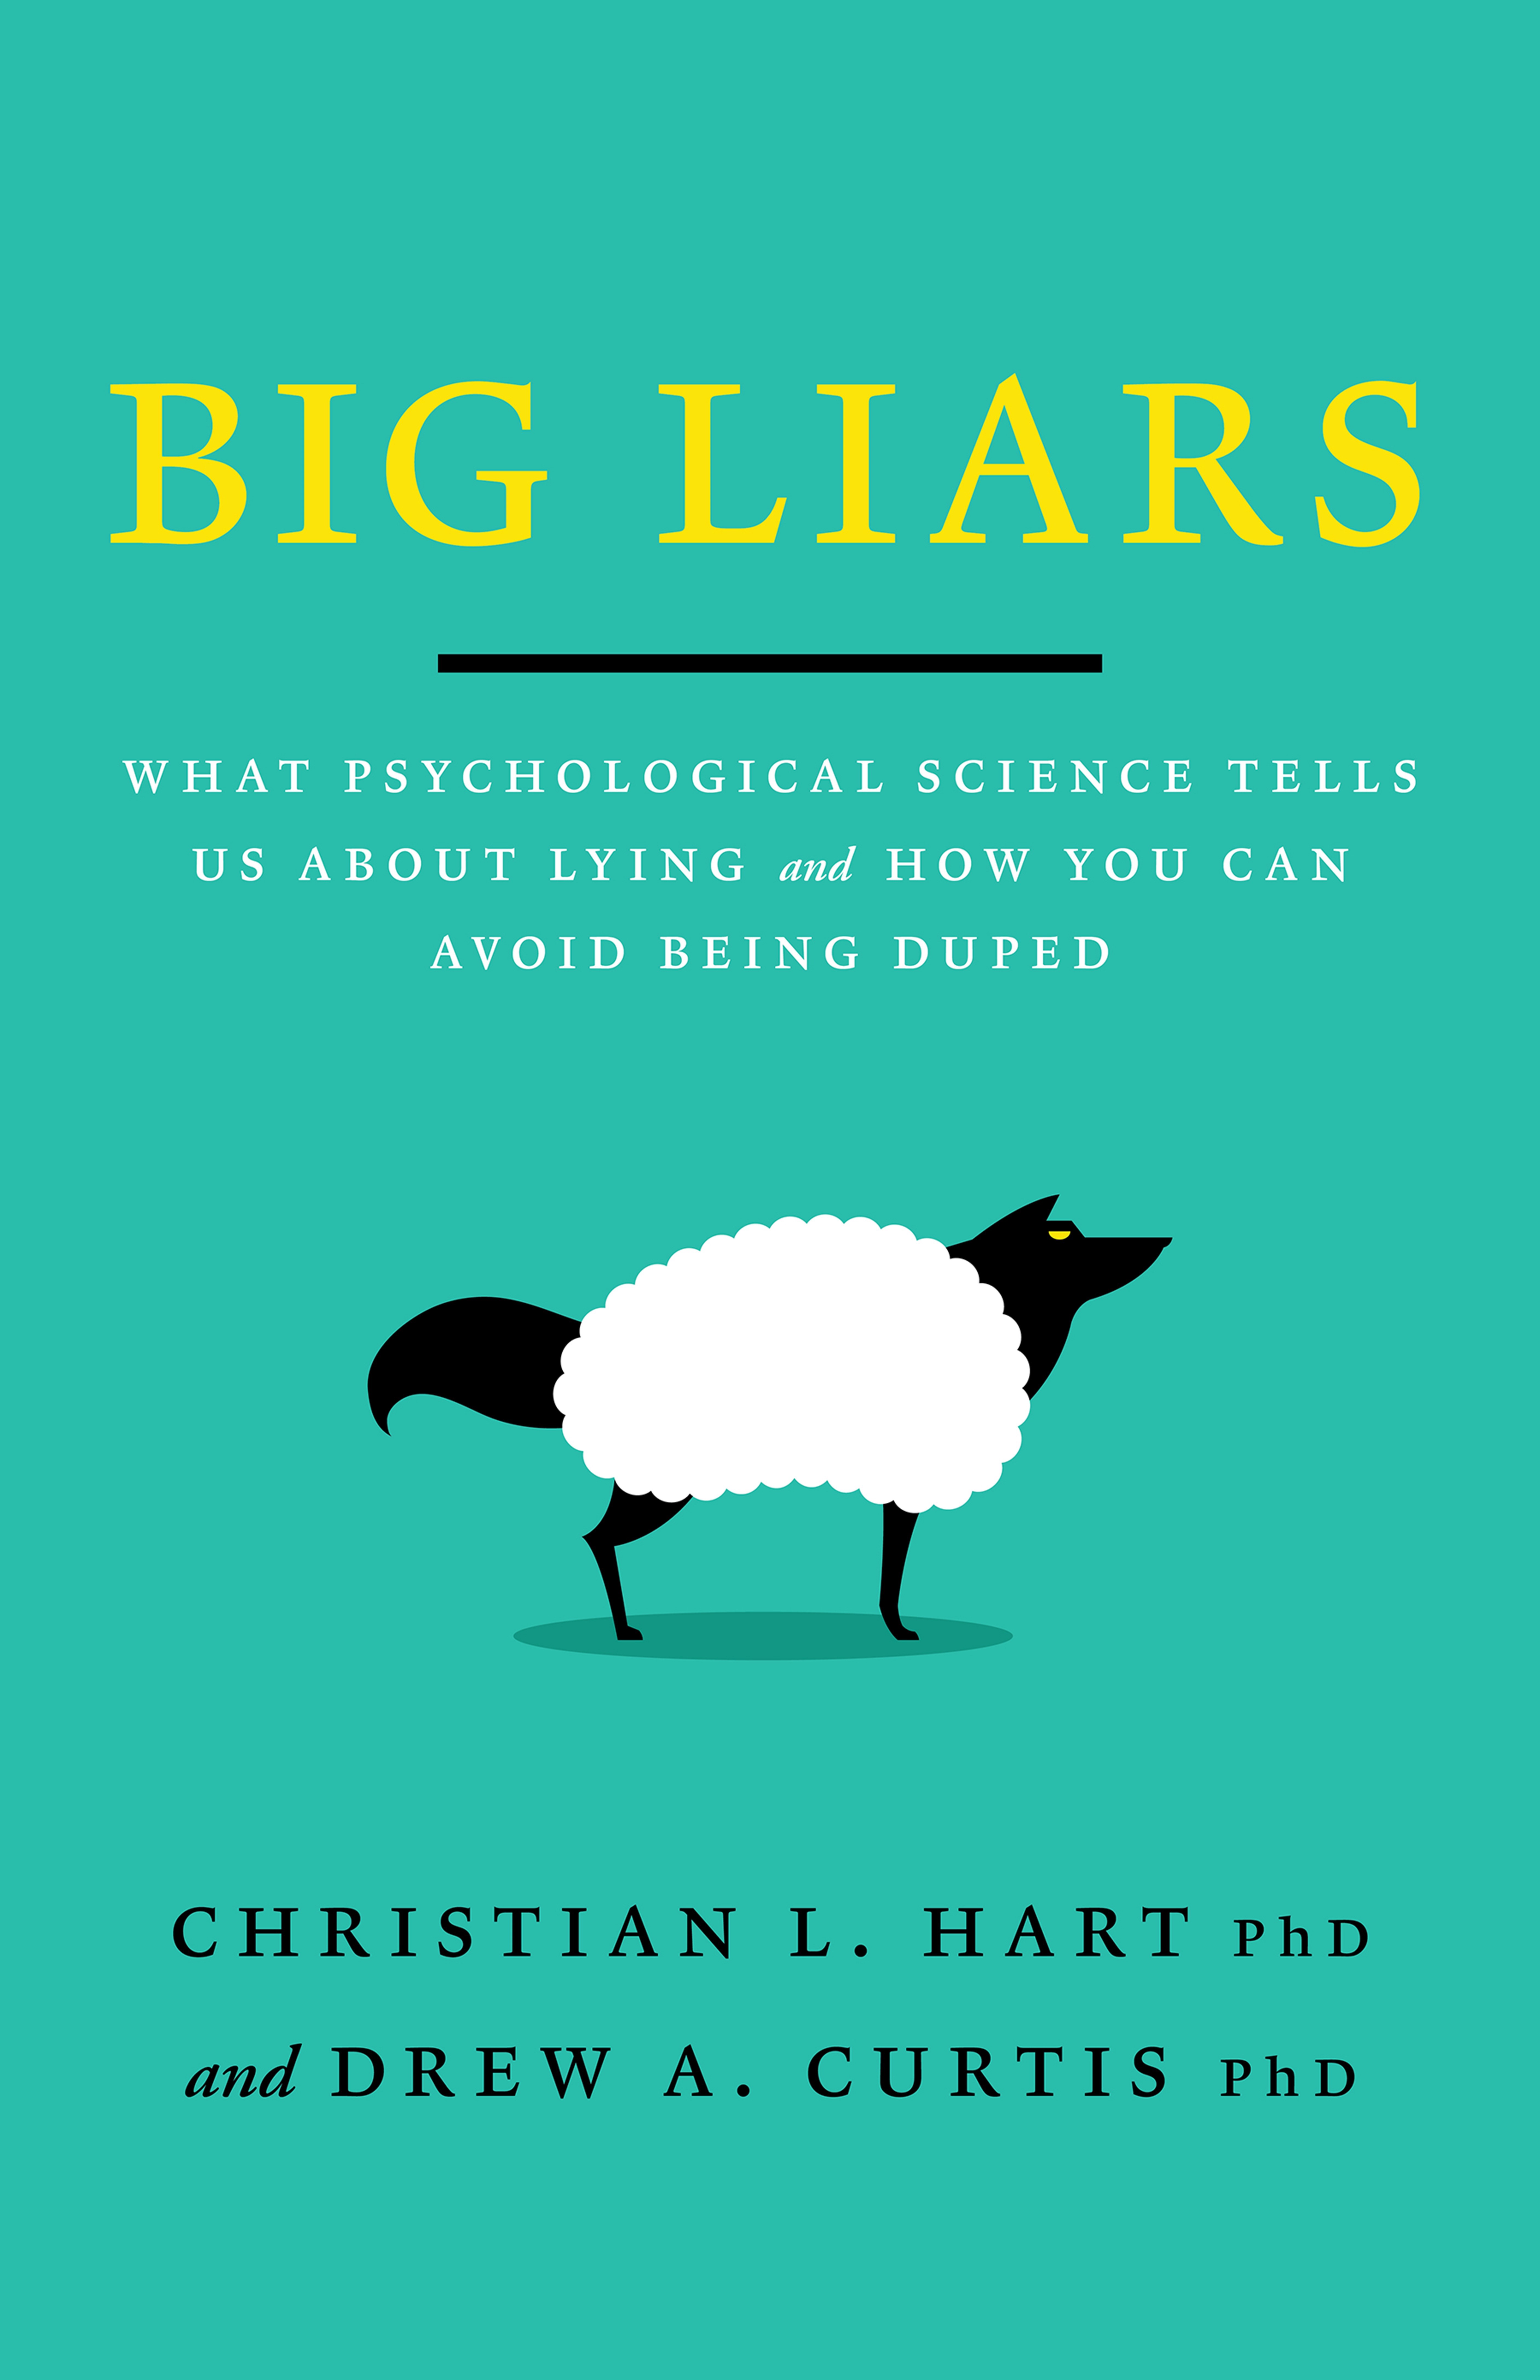 BIG LIARS: WHAT PSYCHOLOGICAL SCIENCE TELLS US ABOUT LYING AND HOW YOU CAN AVOID BEING DUPED